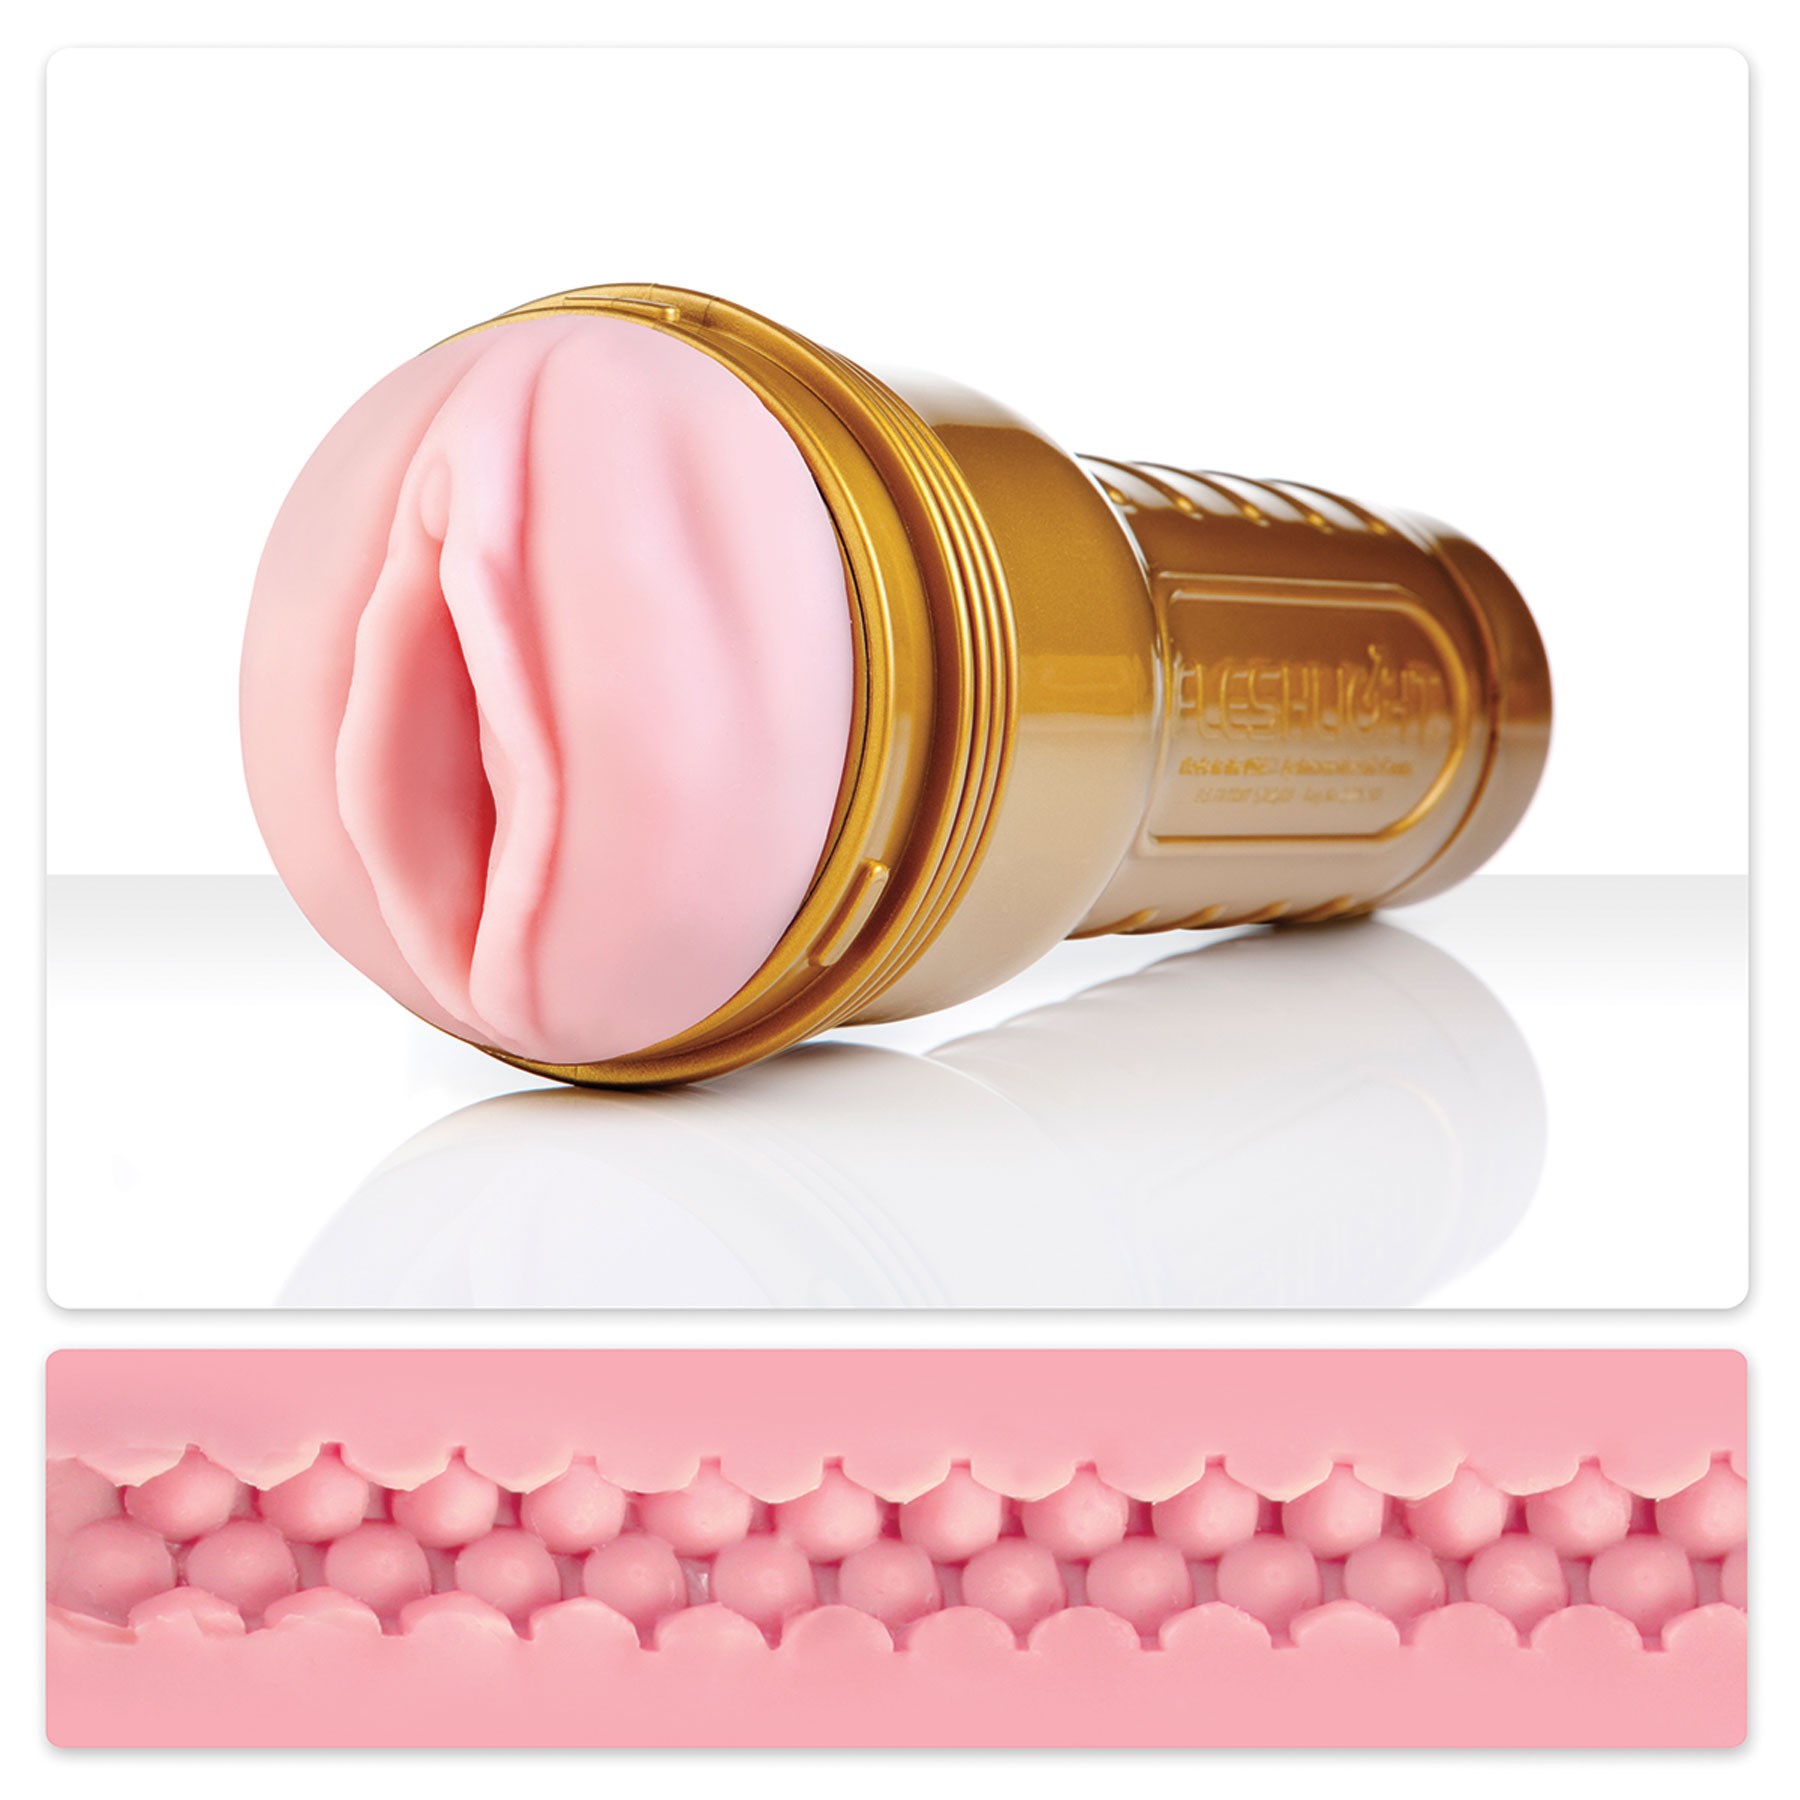 Fleshlight Stamina Trainer Value Pack stroker with tunnel texture shown